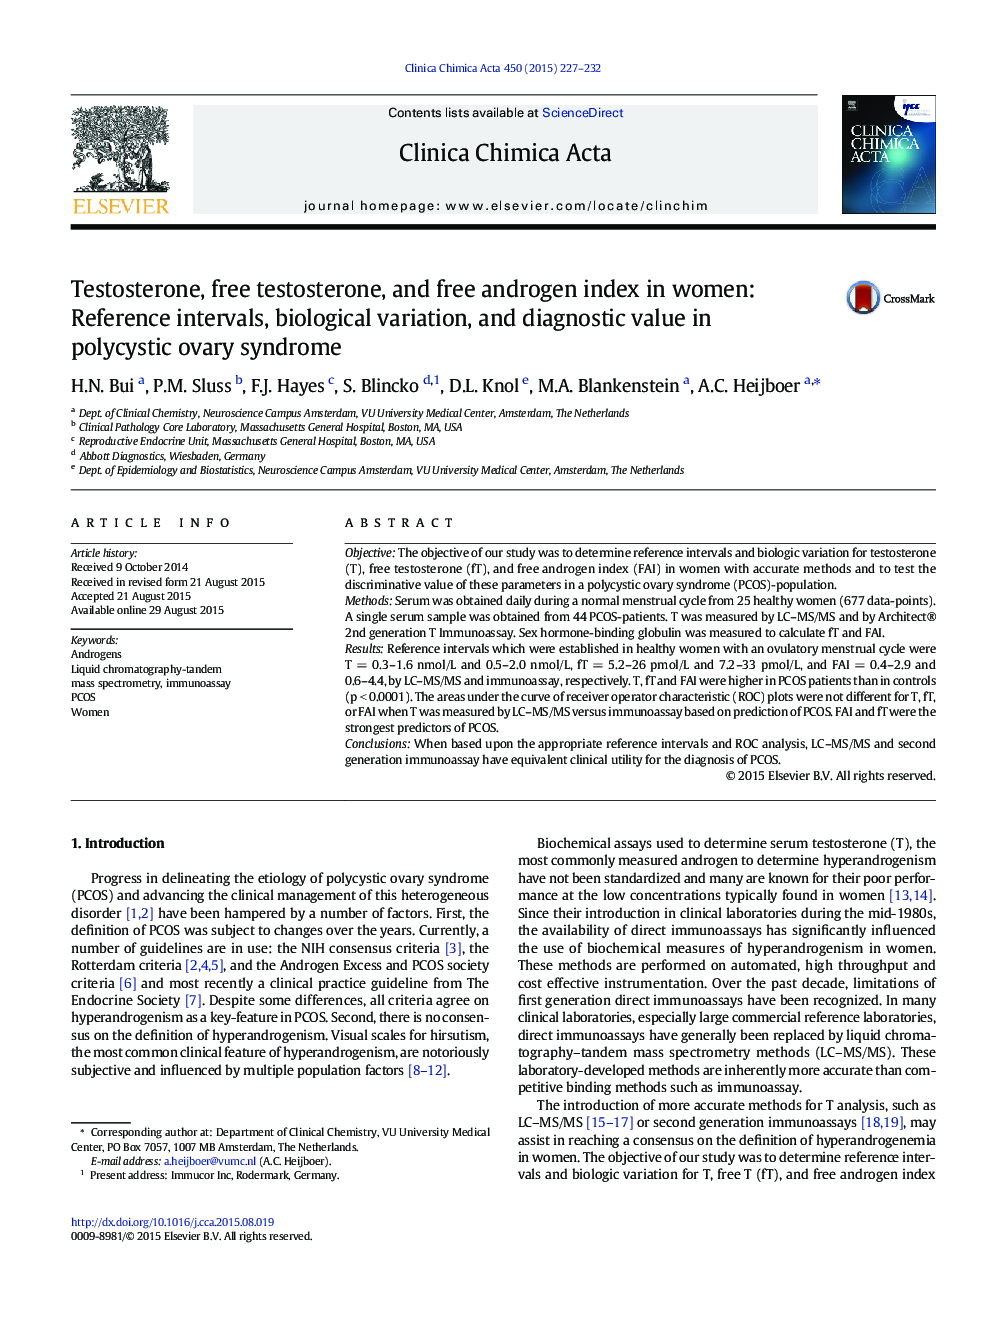 Testosterone, free testosterone, and free androgen index in women: Reference intervals, biological variation, and diagnostic value in polycystic ovary syndrome